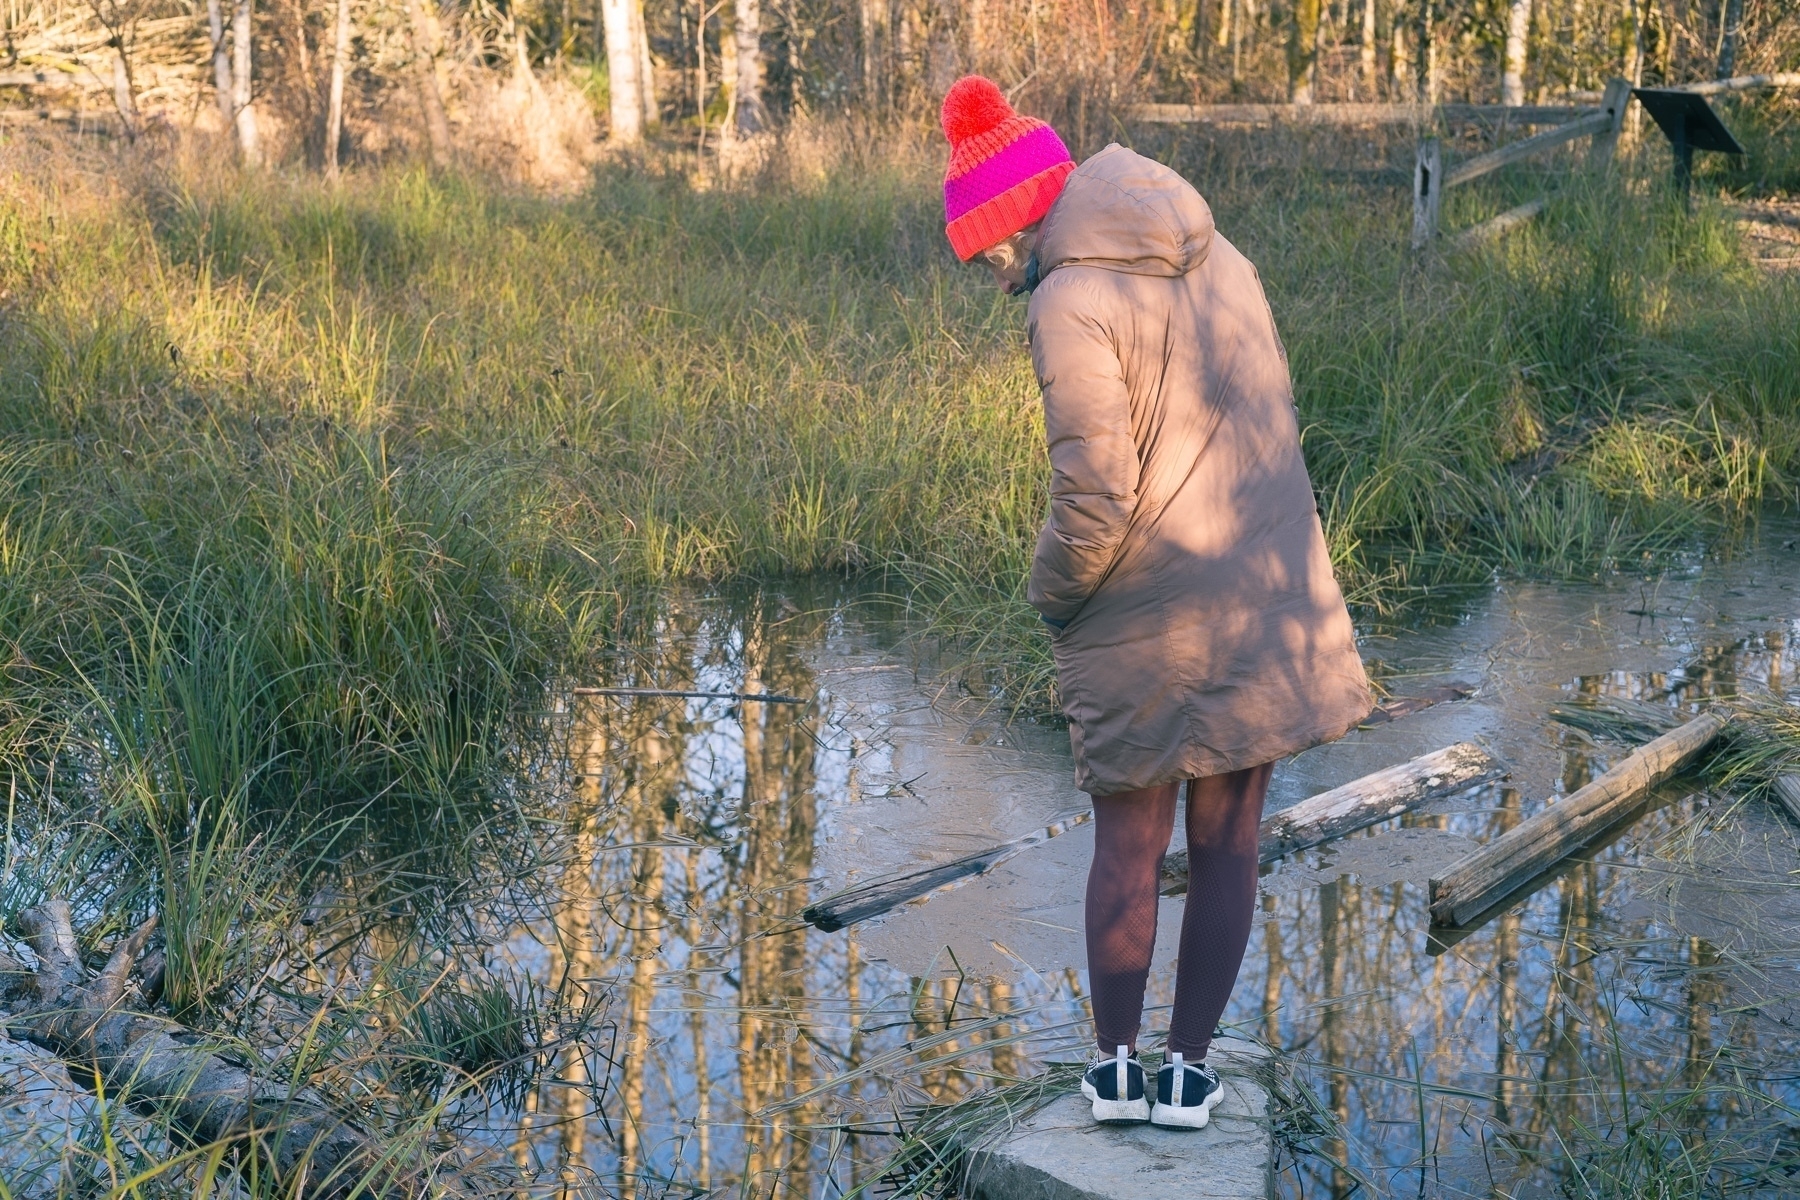 A woman stands on a rock on the edge of a pond. She’s dressed for a freezing cold day. There’s green grass in parts of the pond and trees behind which are reflected in the pond. Everything is lit with sunlight and shadows.